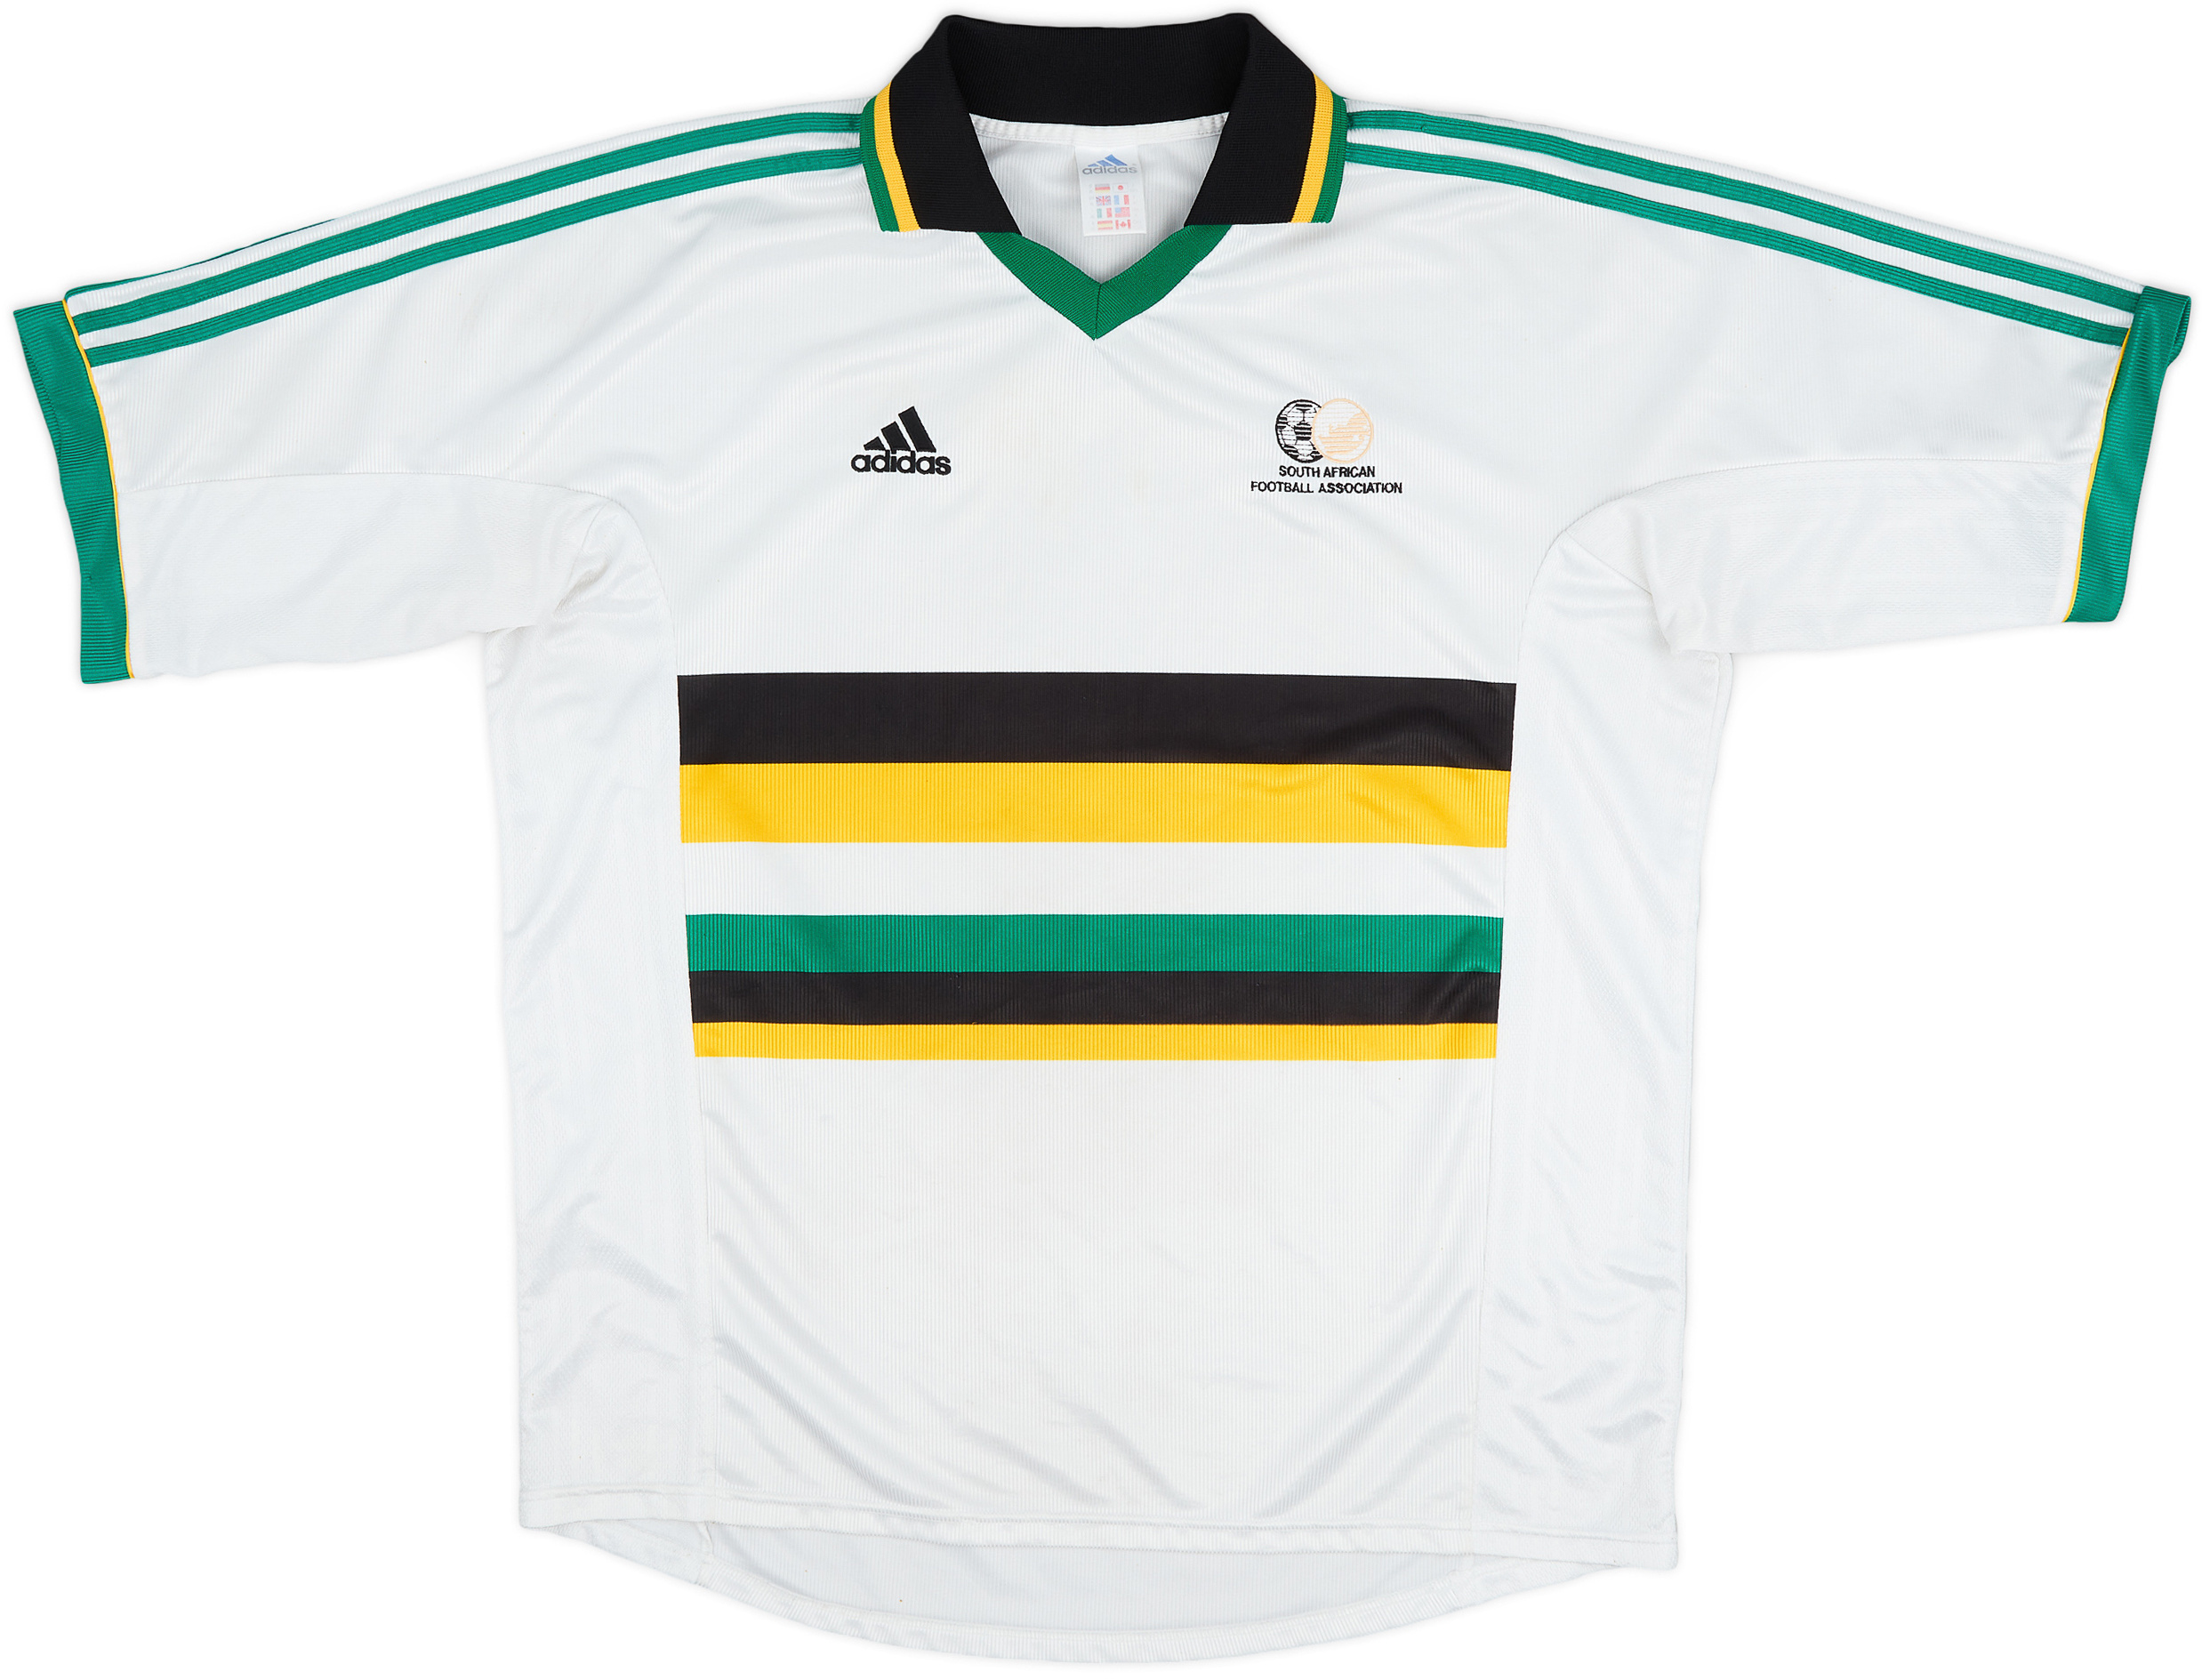 1999-00 South Africa Home Shirt - 7/10 - ()